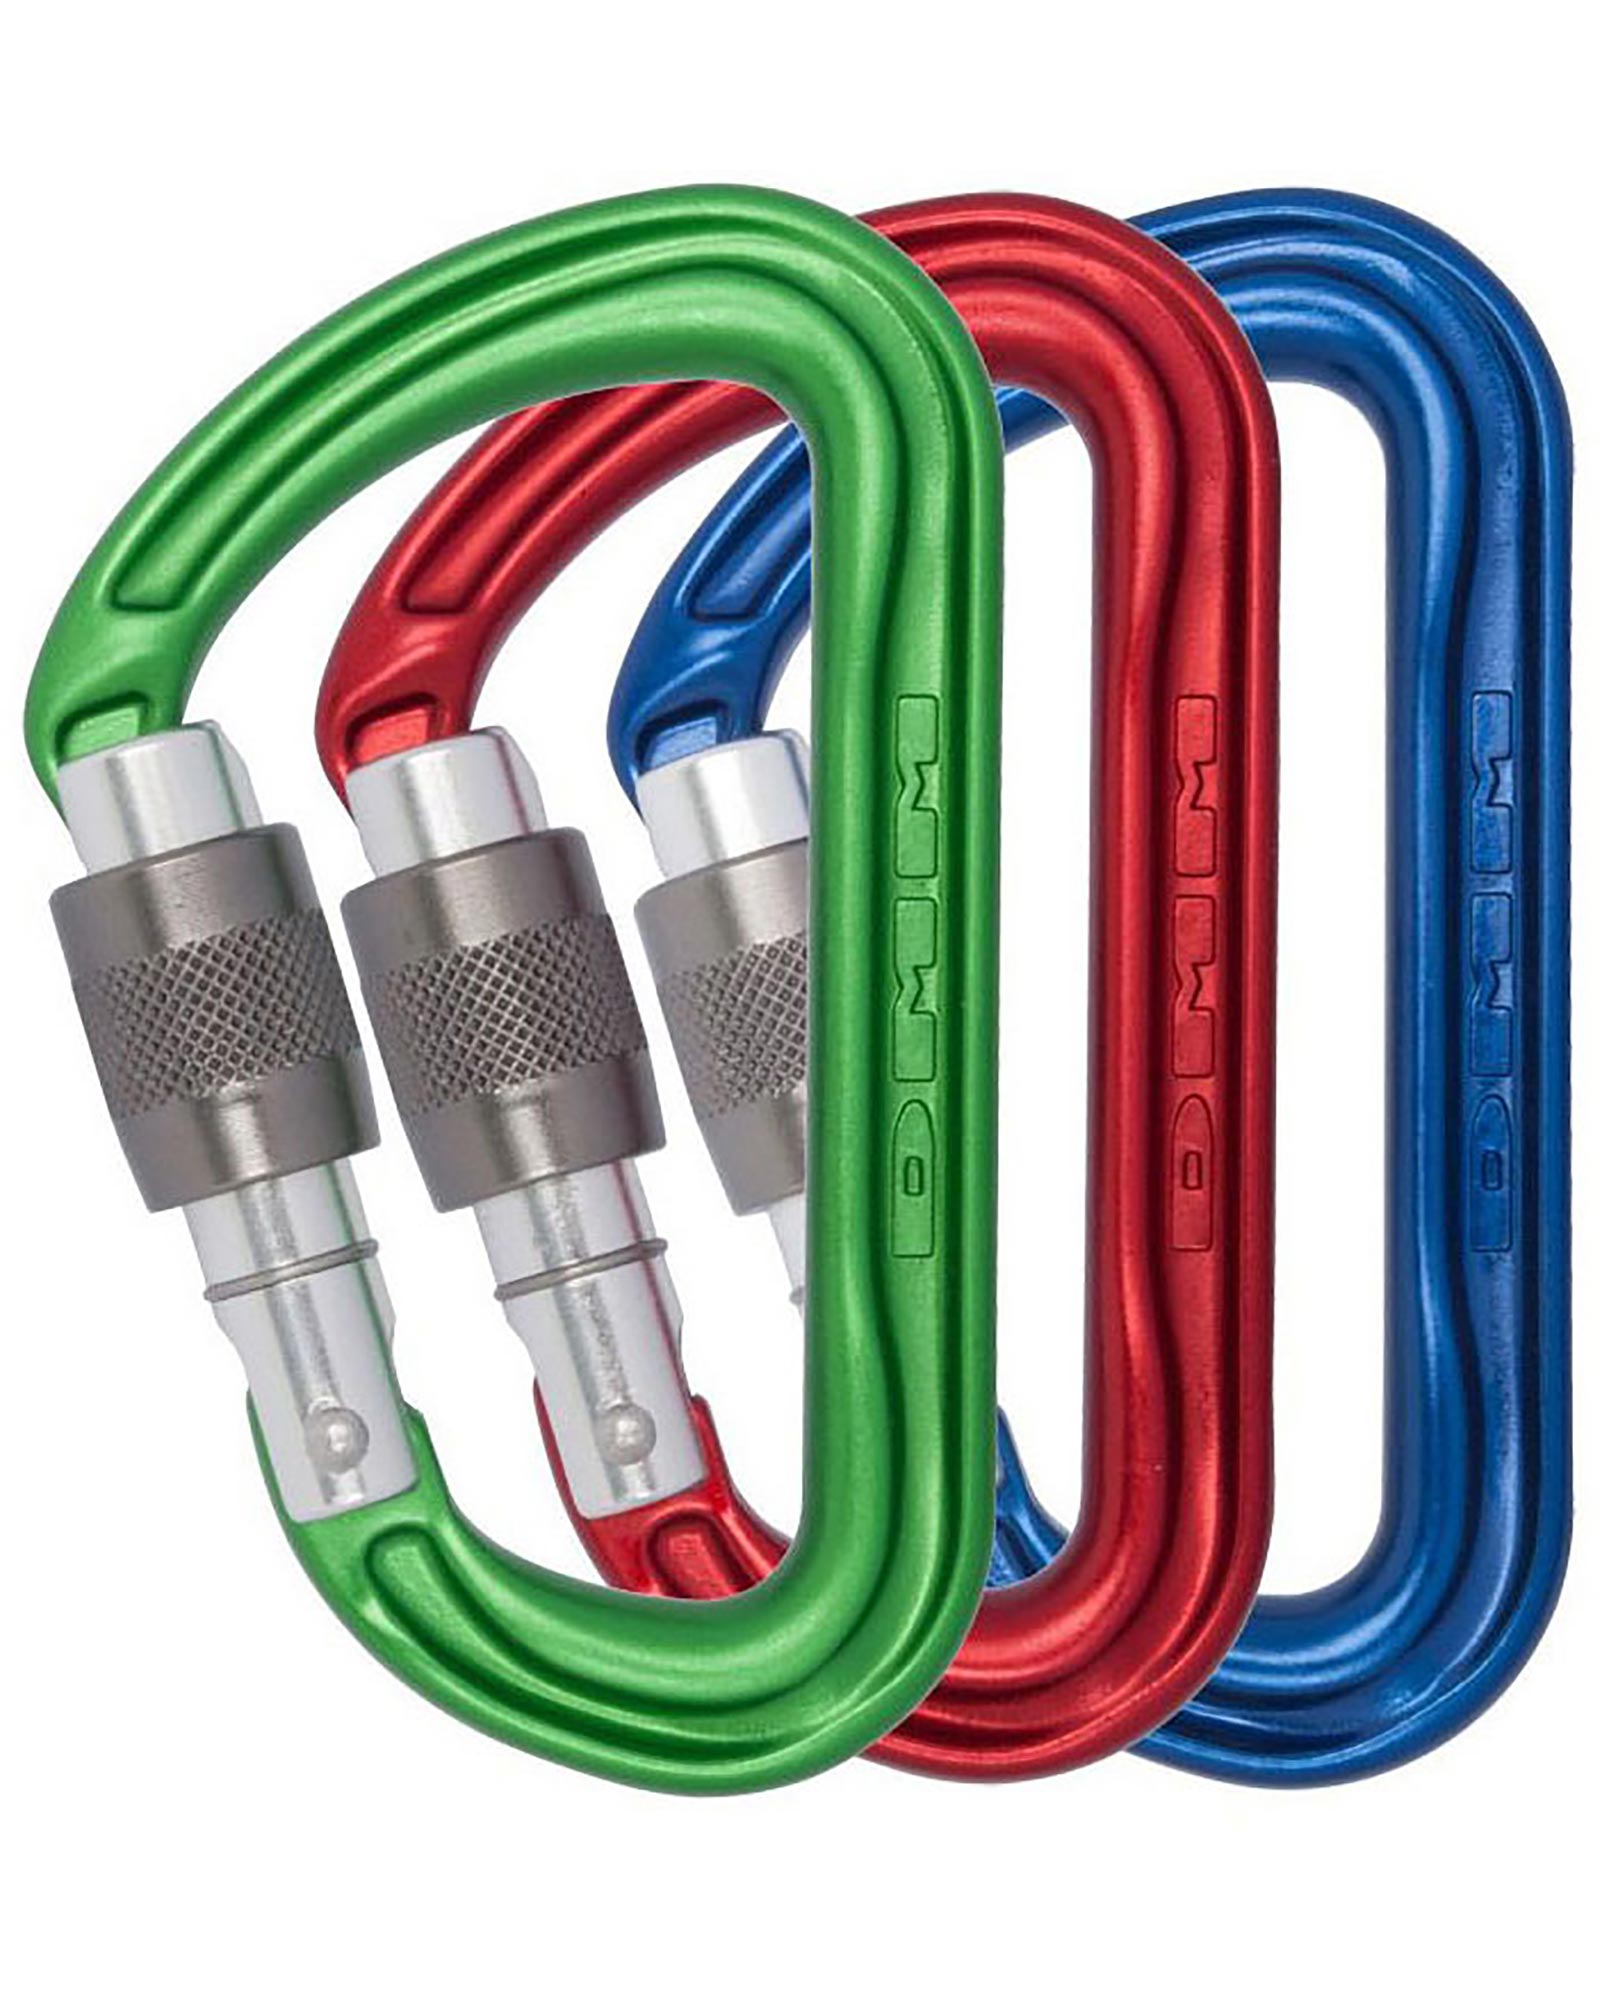 DMM Shadow Screwgate Carabiner Coloured 3 Pack - Blue/Red/Green